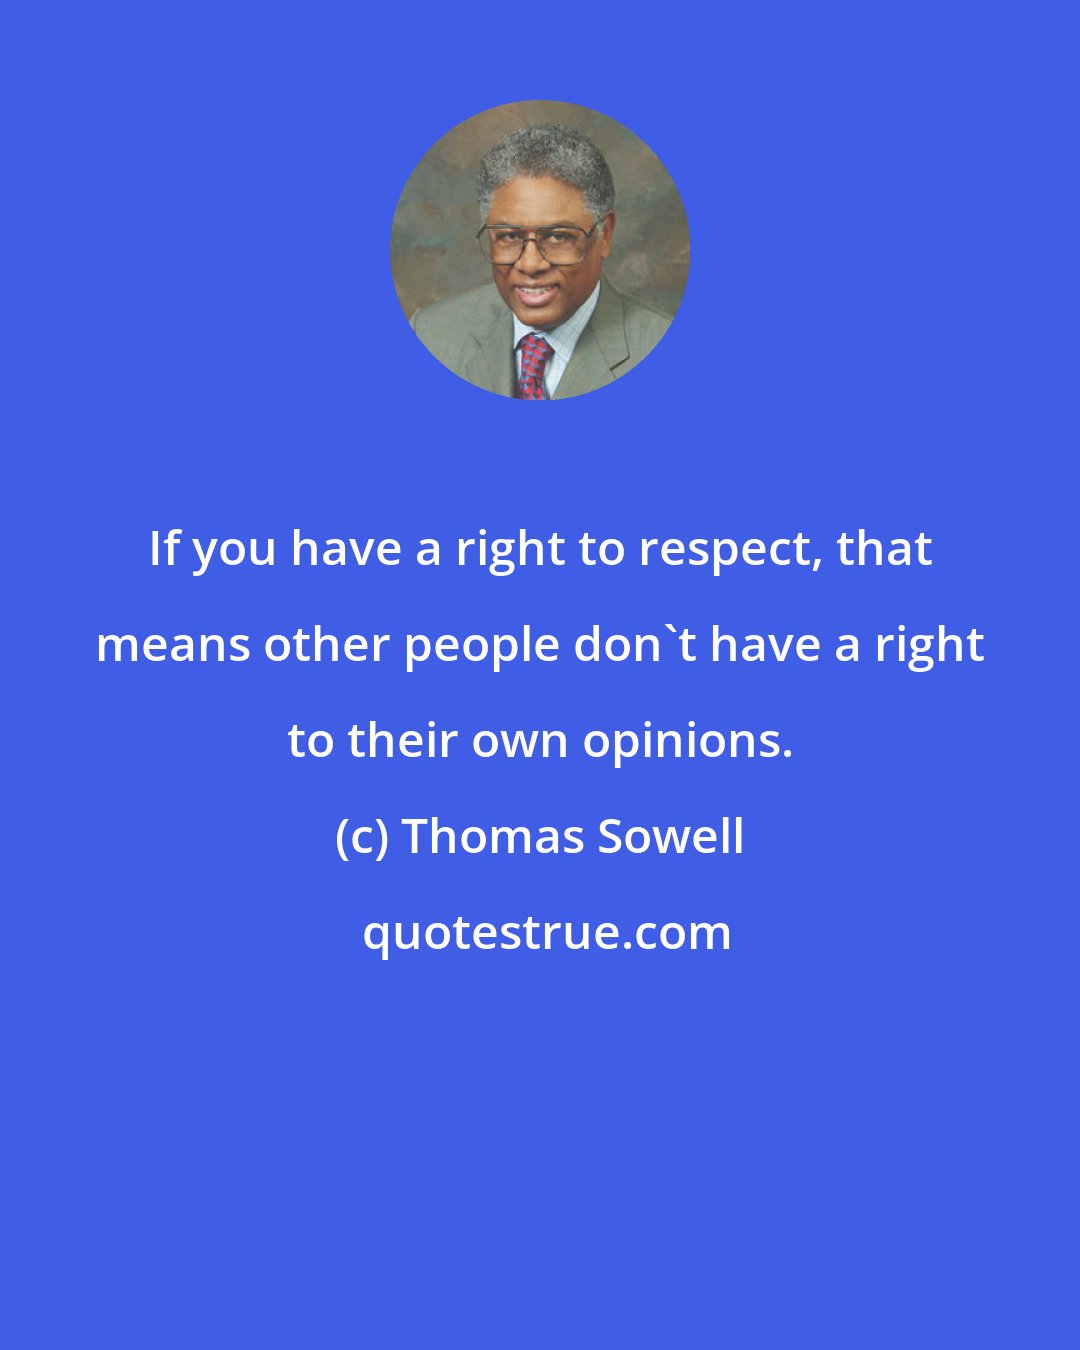 Thomas Sowell: If you have a right to respect, that means other people don't have a right to their own opinions.